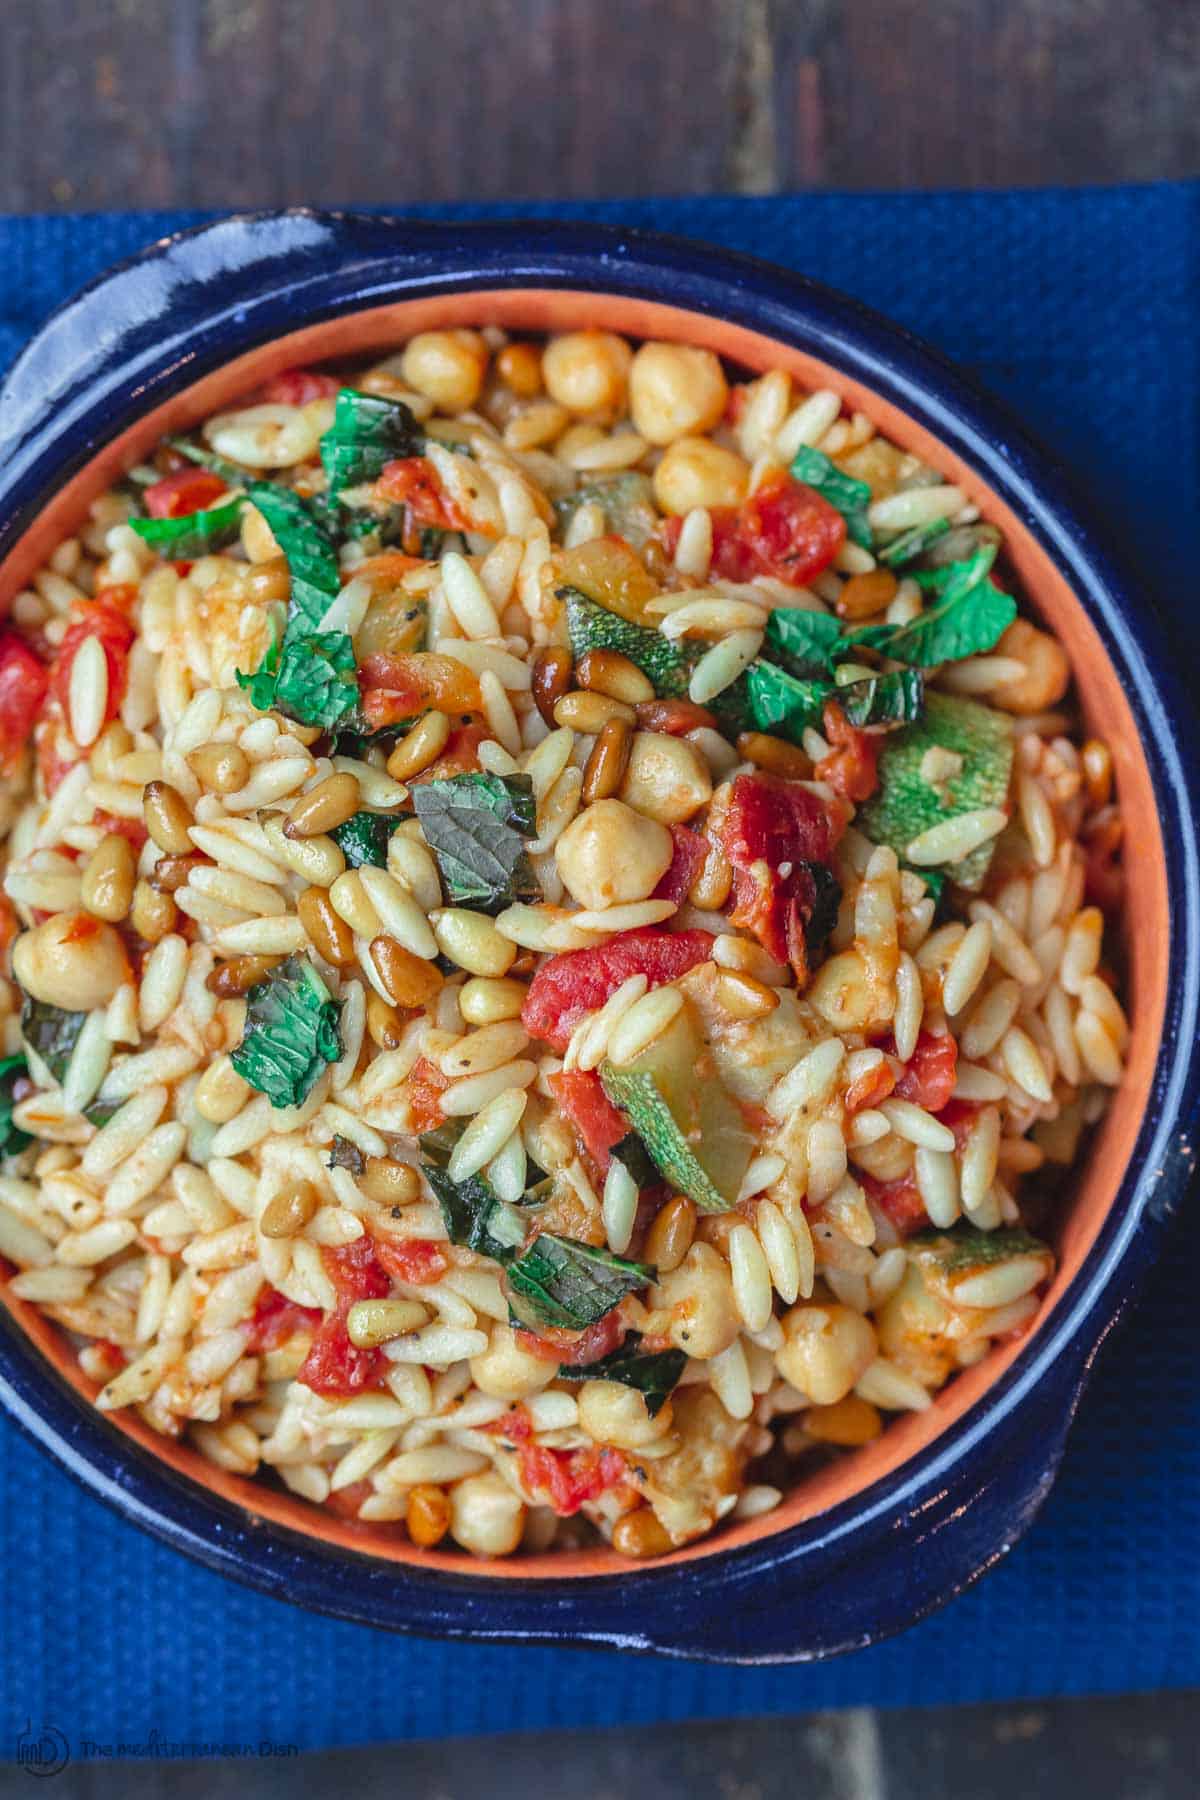 Orzo with zucchini, chickpeas, and tomatoes. Garnished with fresh mint and toasted pine nuts